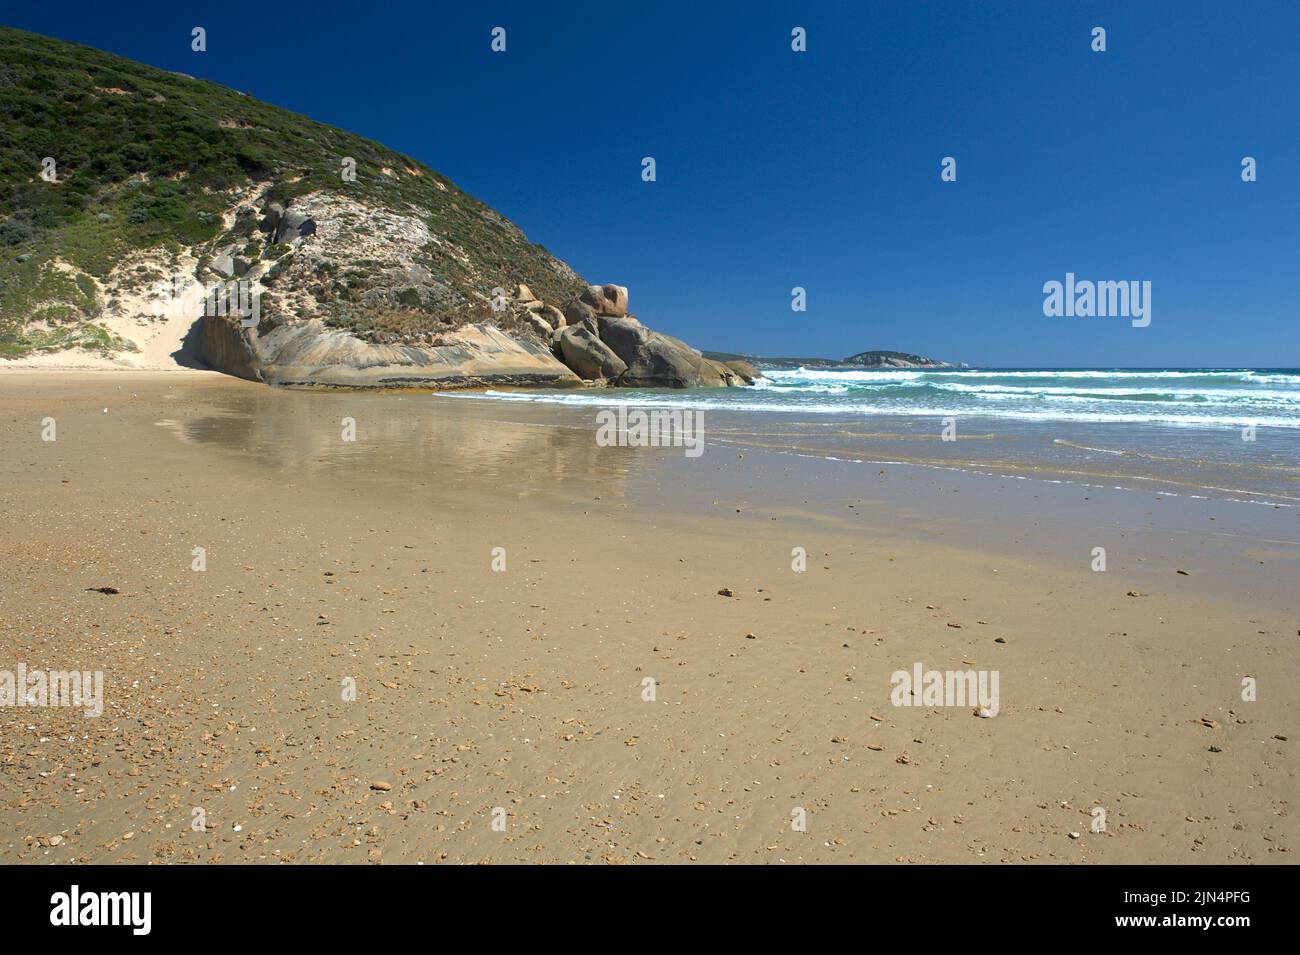 Tongue Point is a popular holiday spot on the Western side of Wilsons Promontory National Park in Victoria, Australia. Not usually this deserted! Stock Photo